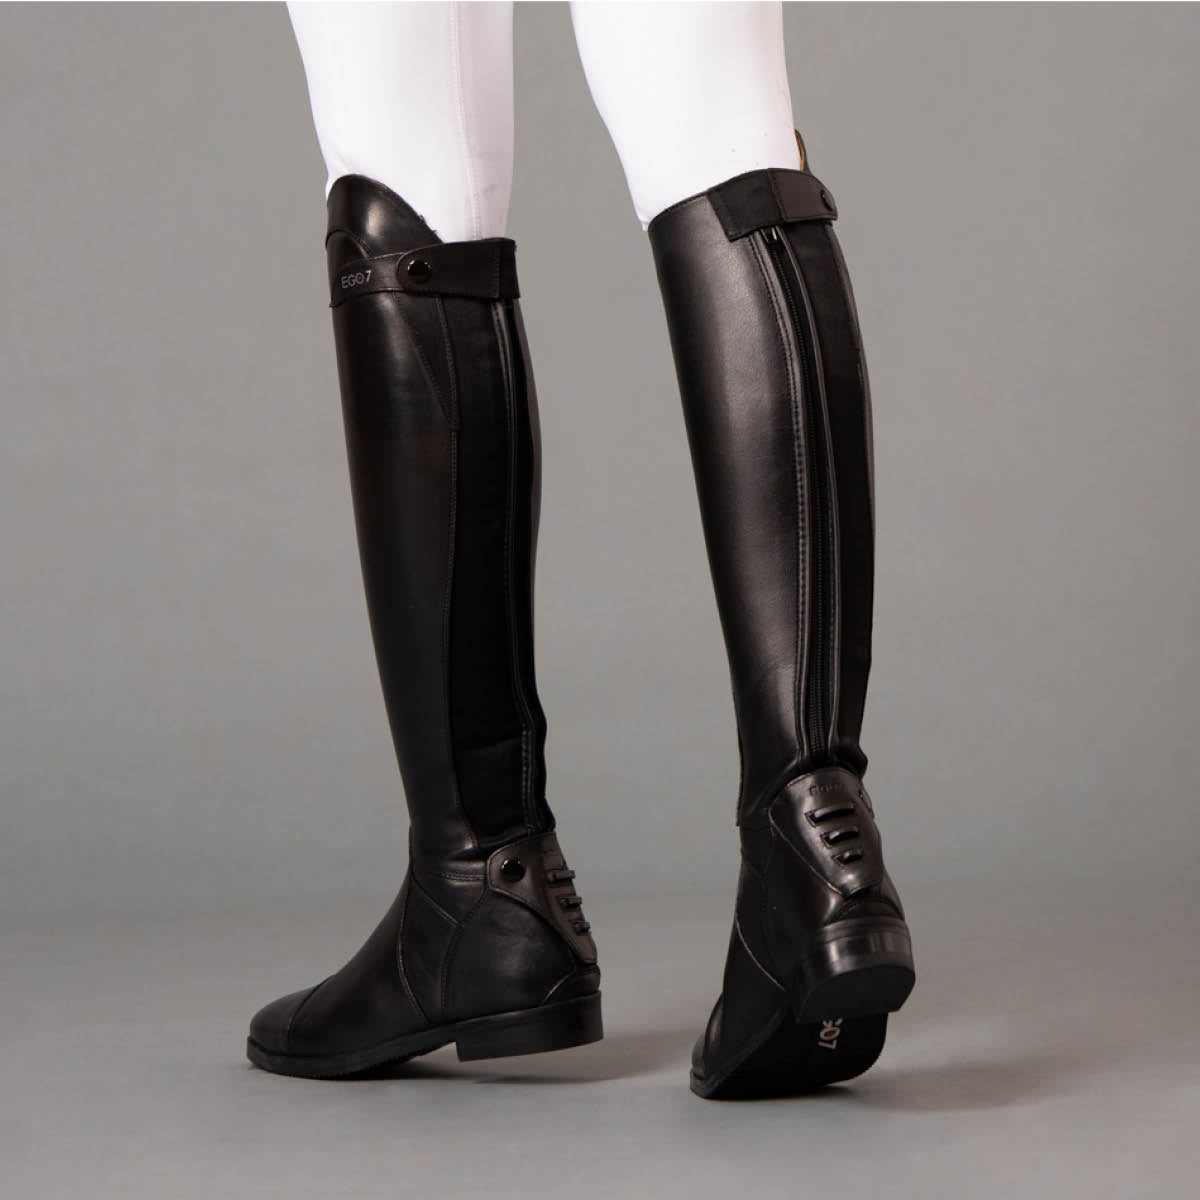 High quality riding boots